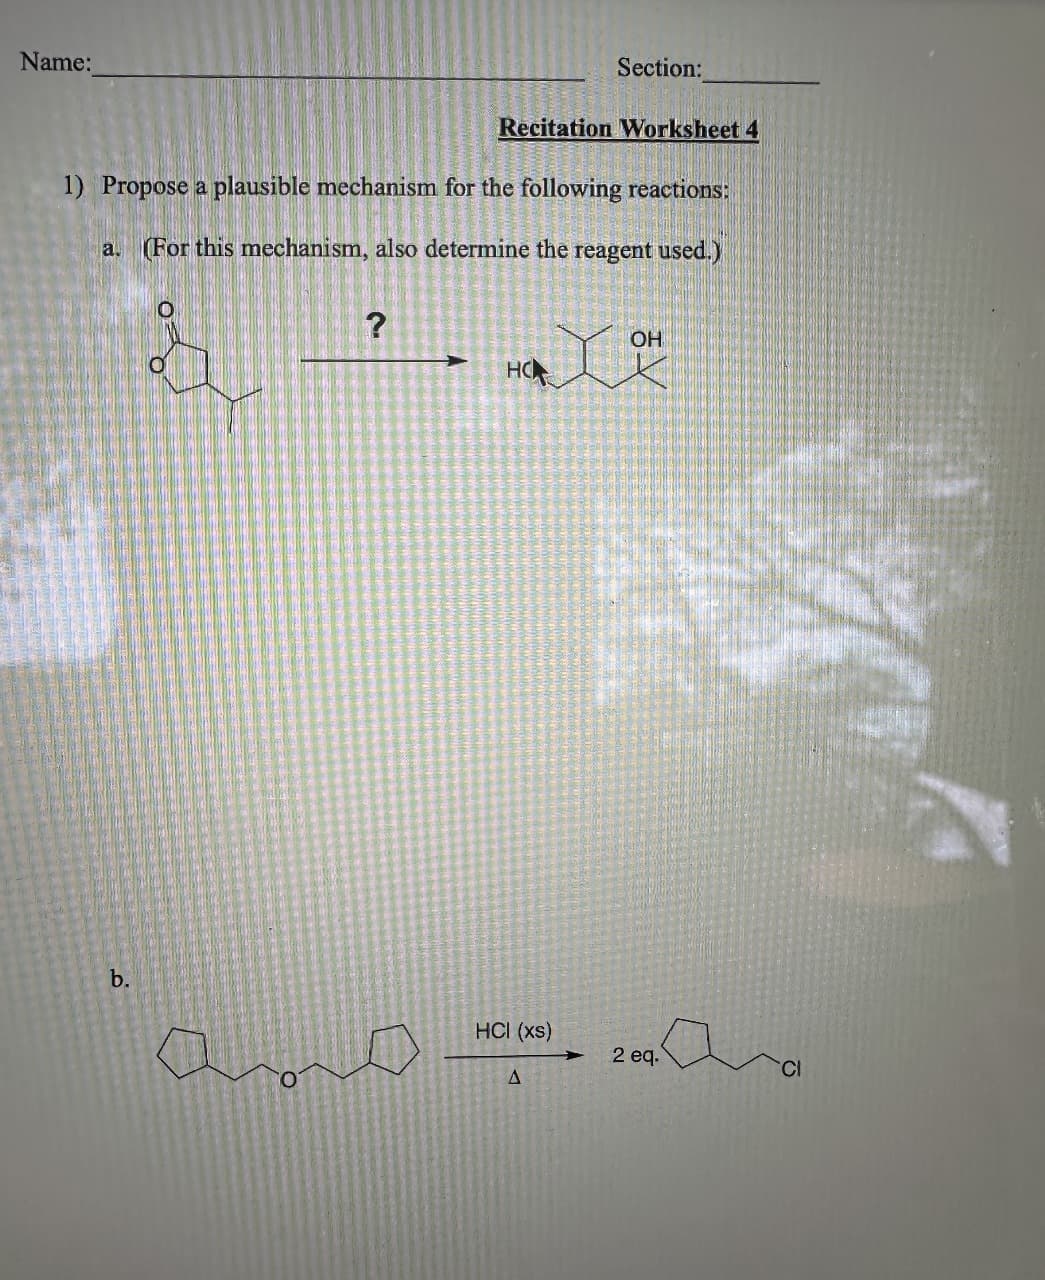 Name:
Recitation Worksheet 4
1) Propose a plausible mechanism for the following reactions:
a. (For this mechanism, also determine the reagent used.)
b.
O
O
?
HO
HCI (xs)
Section:
A
OH
2 eq.
CI